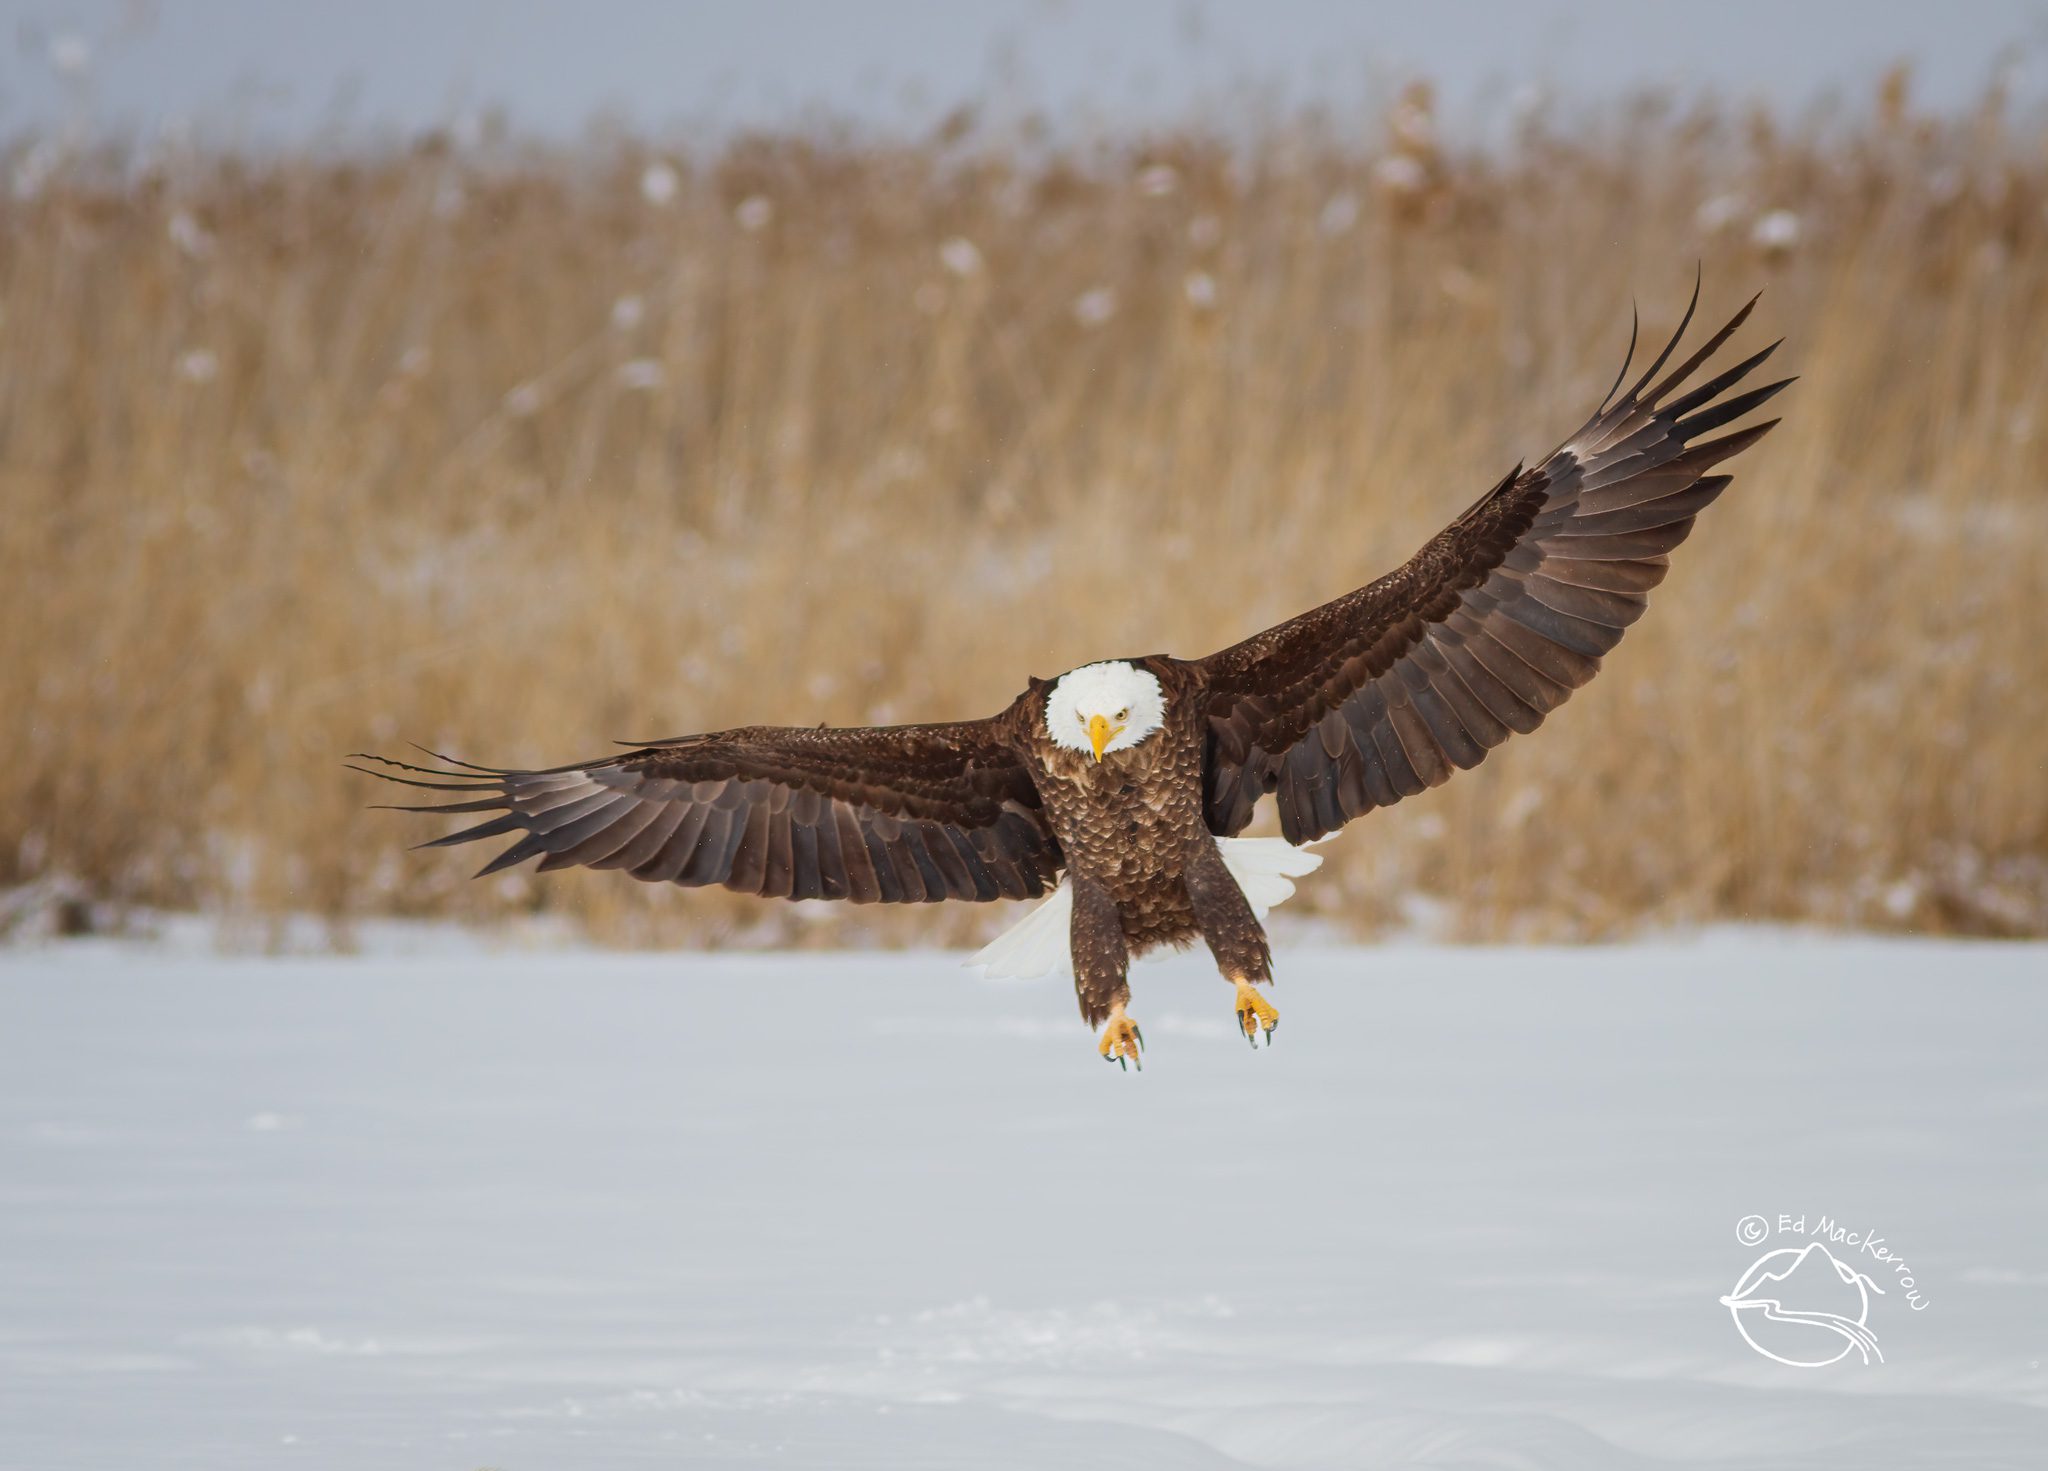 A Bald Eagle lands in the snow with a full wing span.